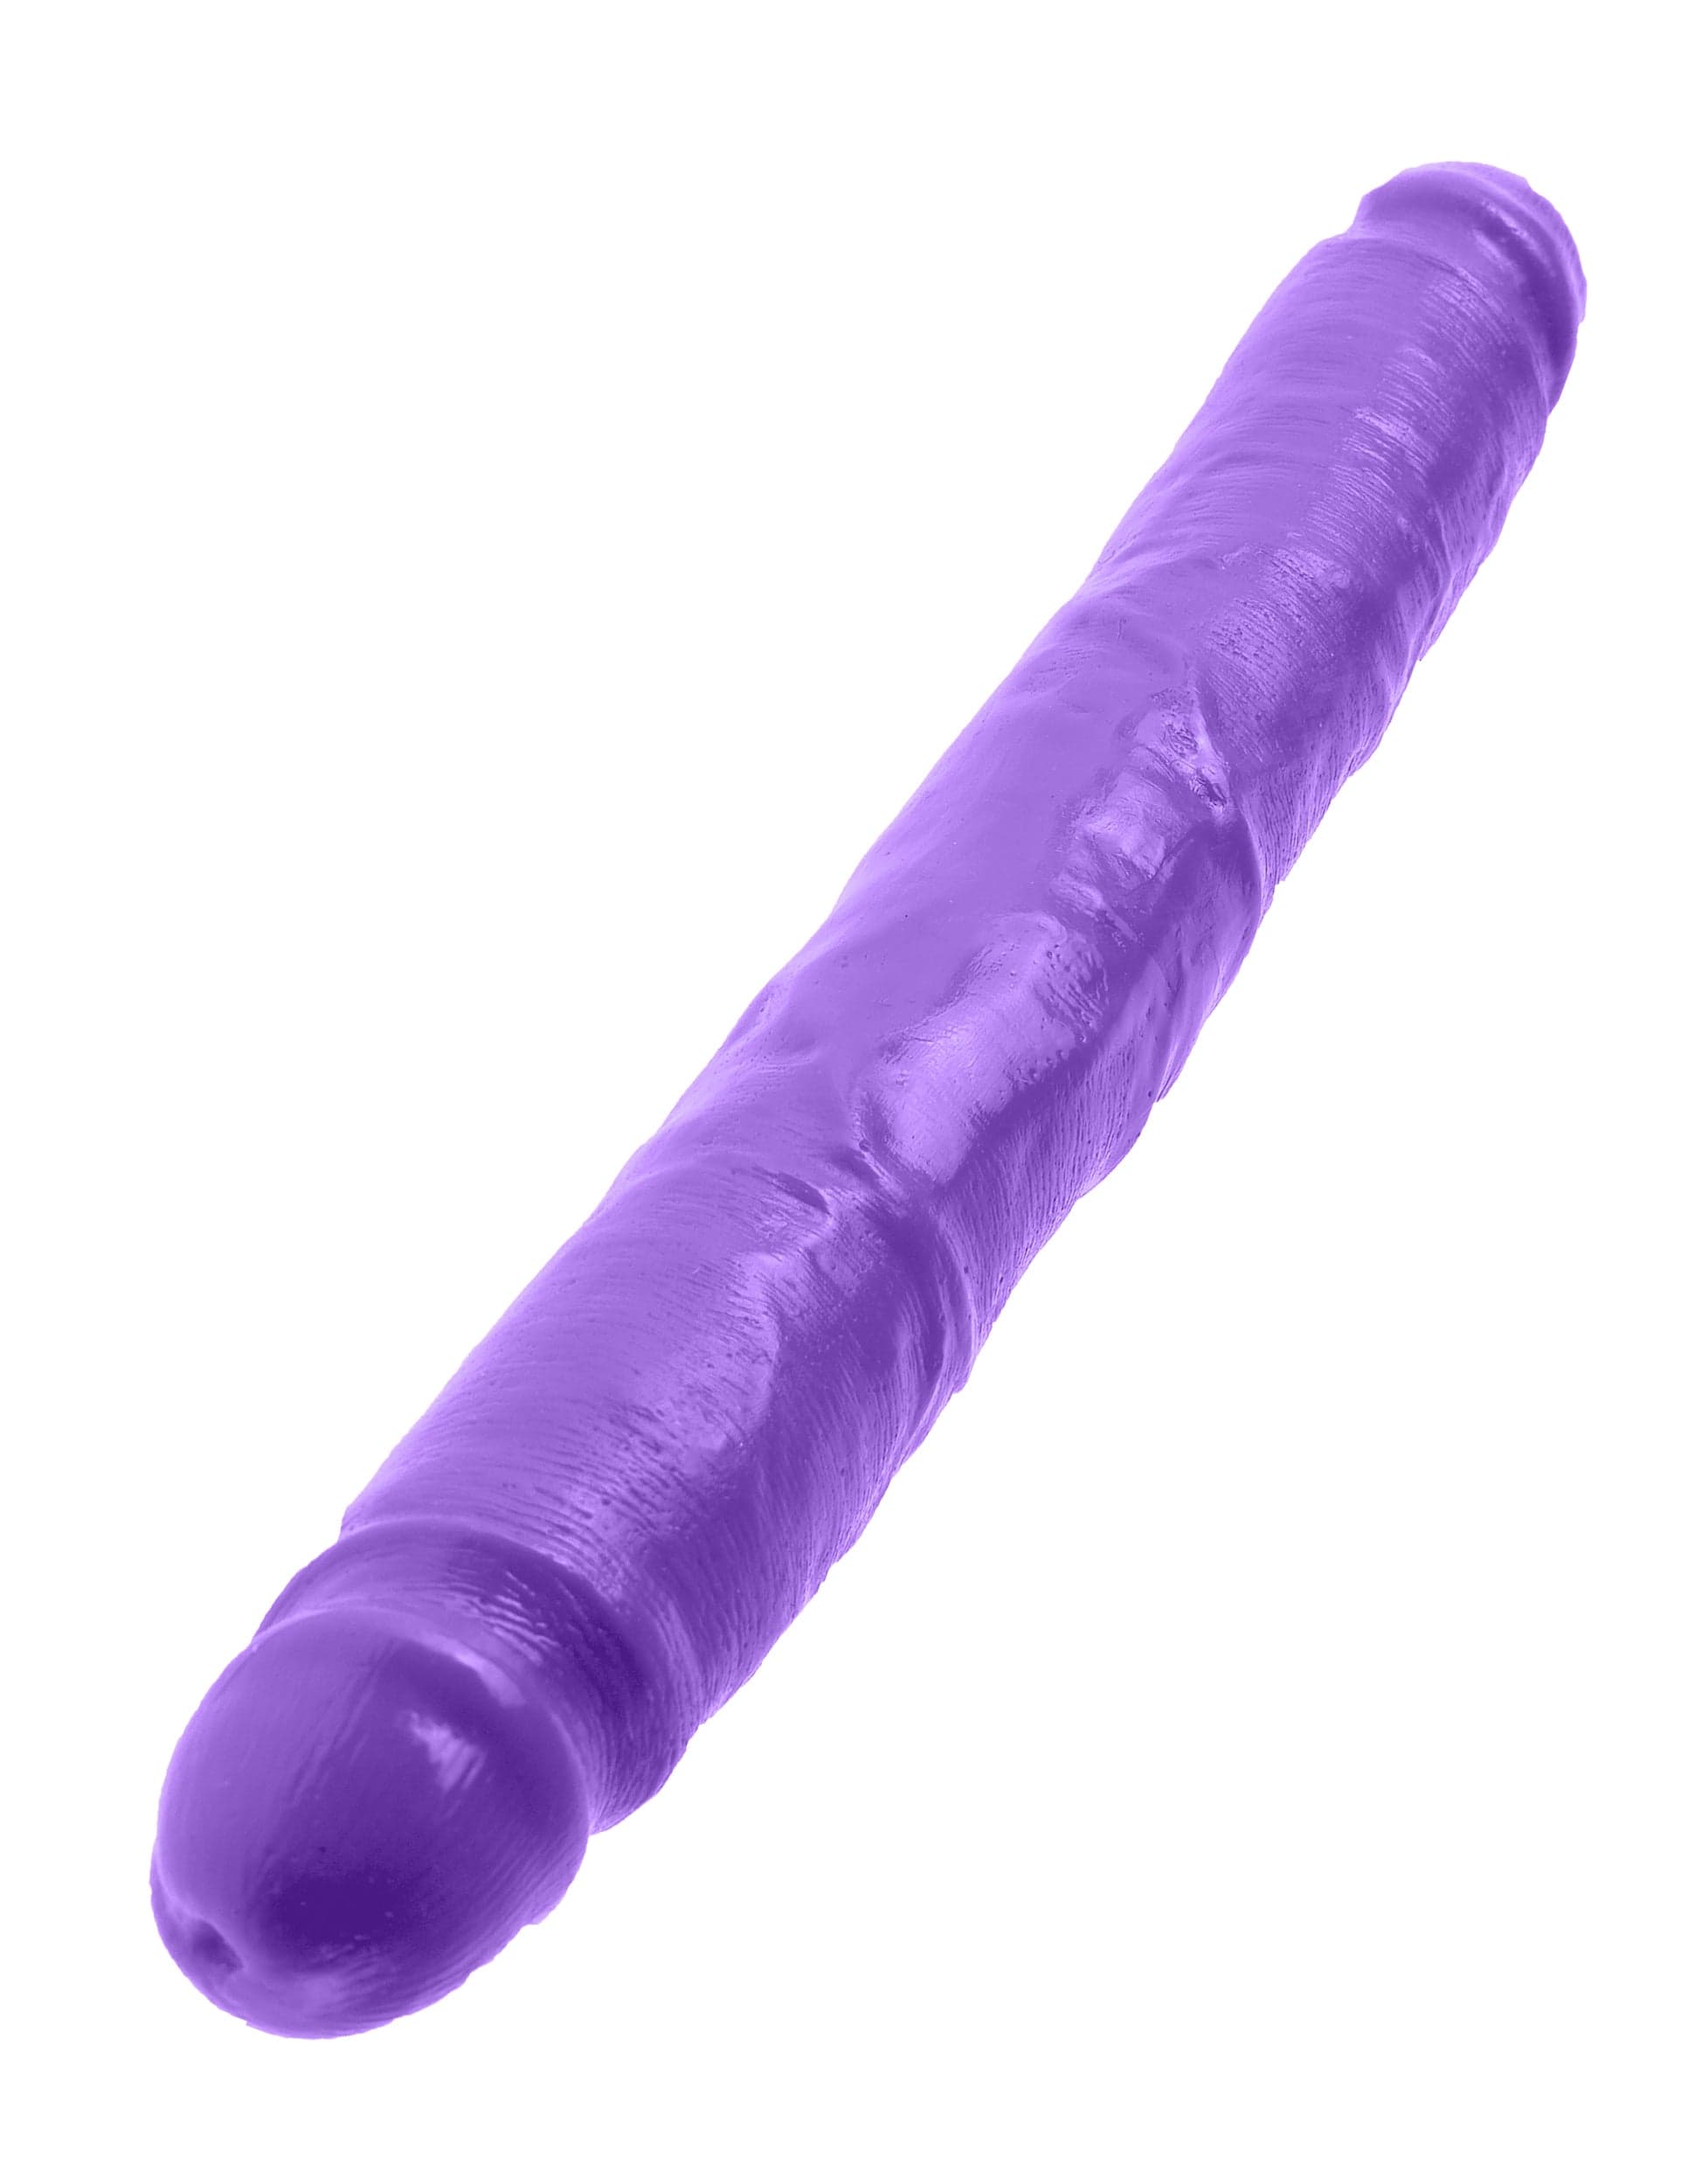 DOUBLE DONG 12" - PURPLE